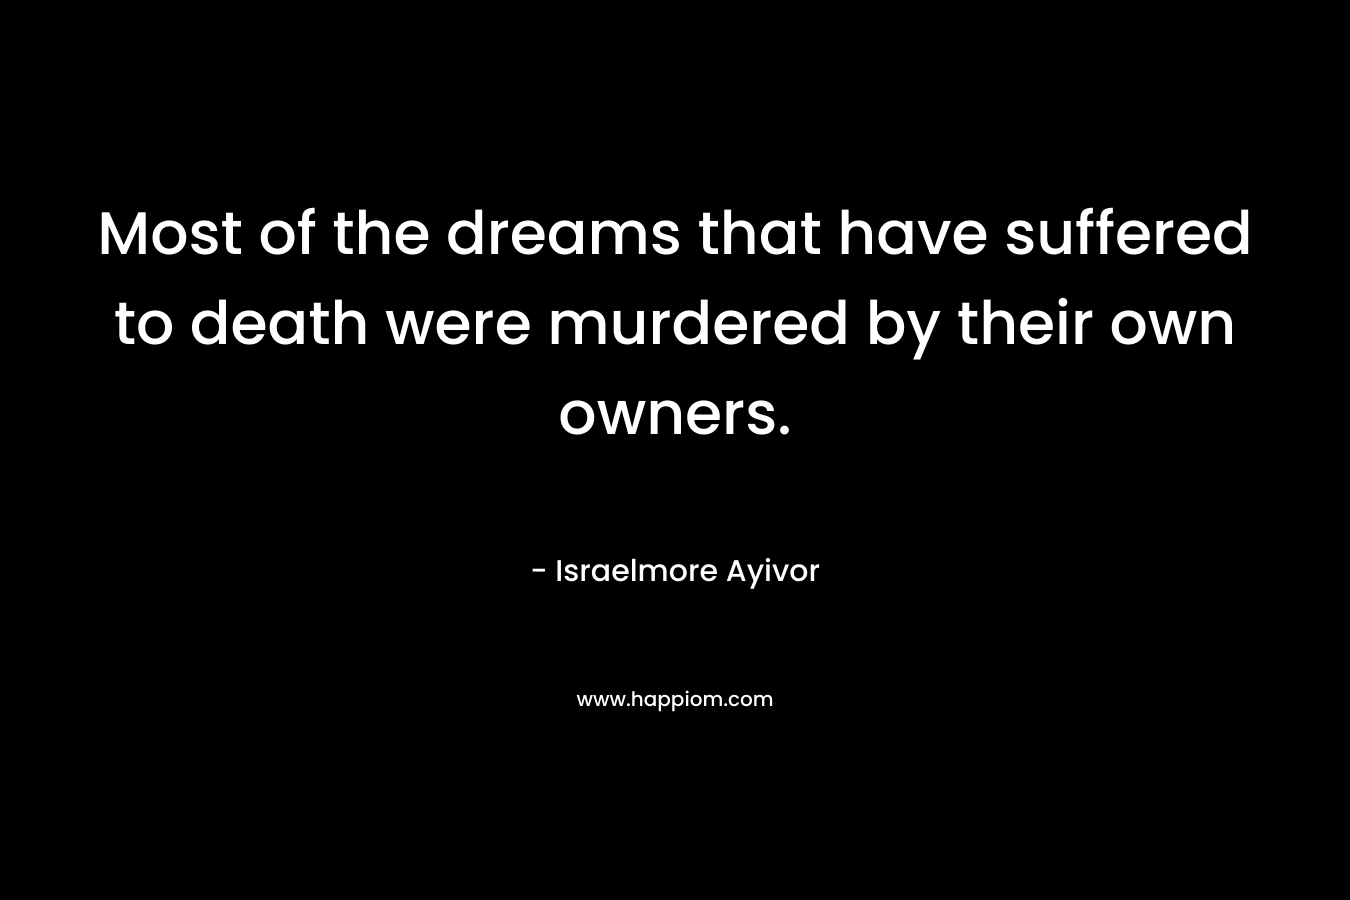 Most of the dreams that have suffered to death were murdered by their own owners. – Israelmore Ayivor